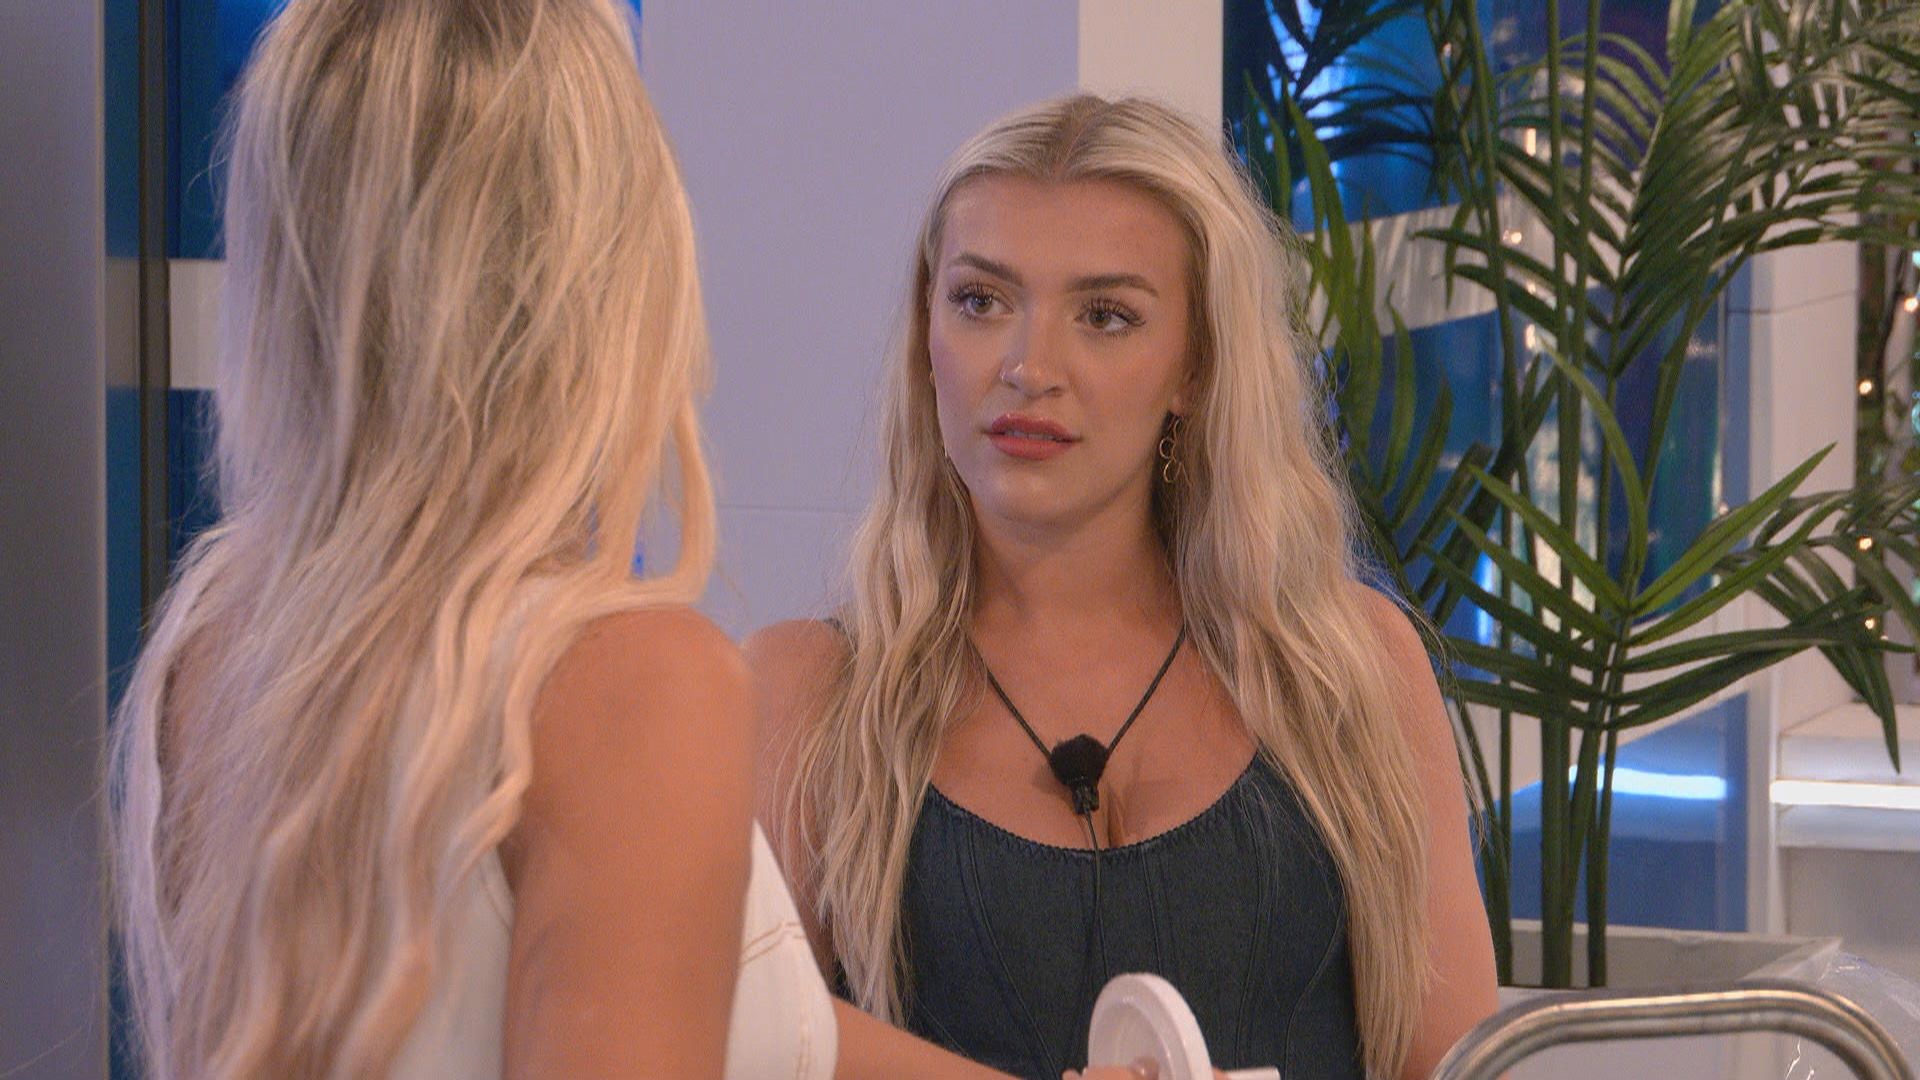 Love Island spoilers! Jess confronts Molly while two new bombshells